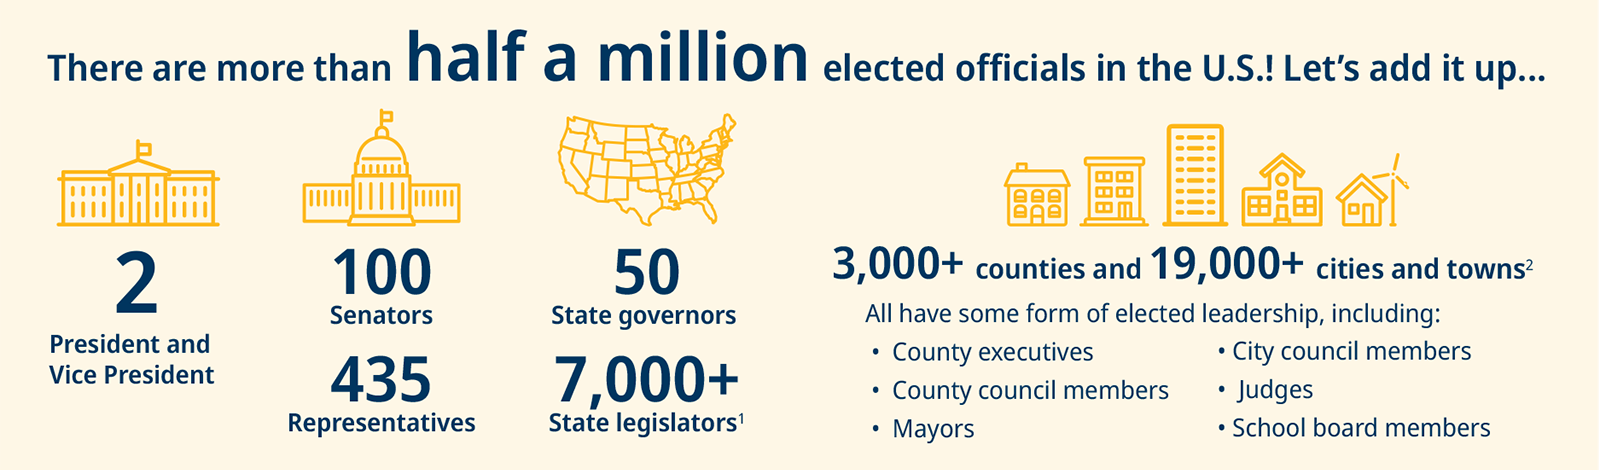 There are more than half a million elected officials in the U.S.! Let’s add it up... 2: President and Vice President; 100 Senators; 435 Representatives; 50 state governors; 7000+ state legislators; 3,000+ counties and 19,000+ cities and towns, and all have some form of elected leadership, including: county executives, county council members, mayors, city council members, judges, school board members.